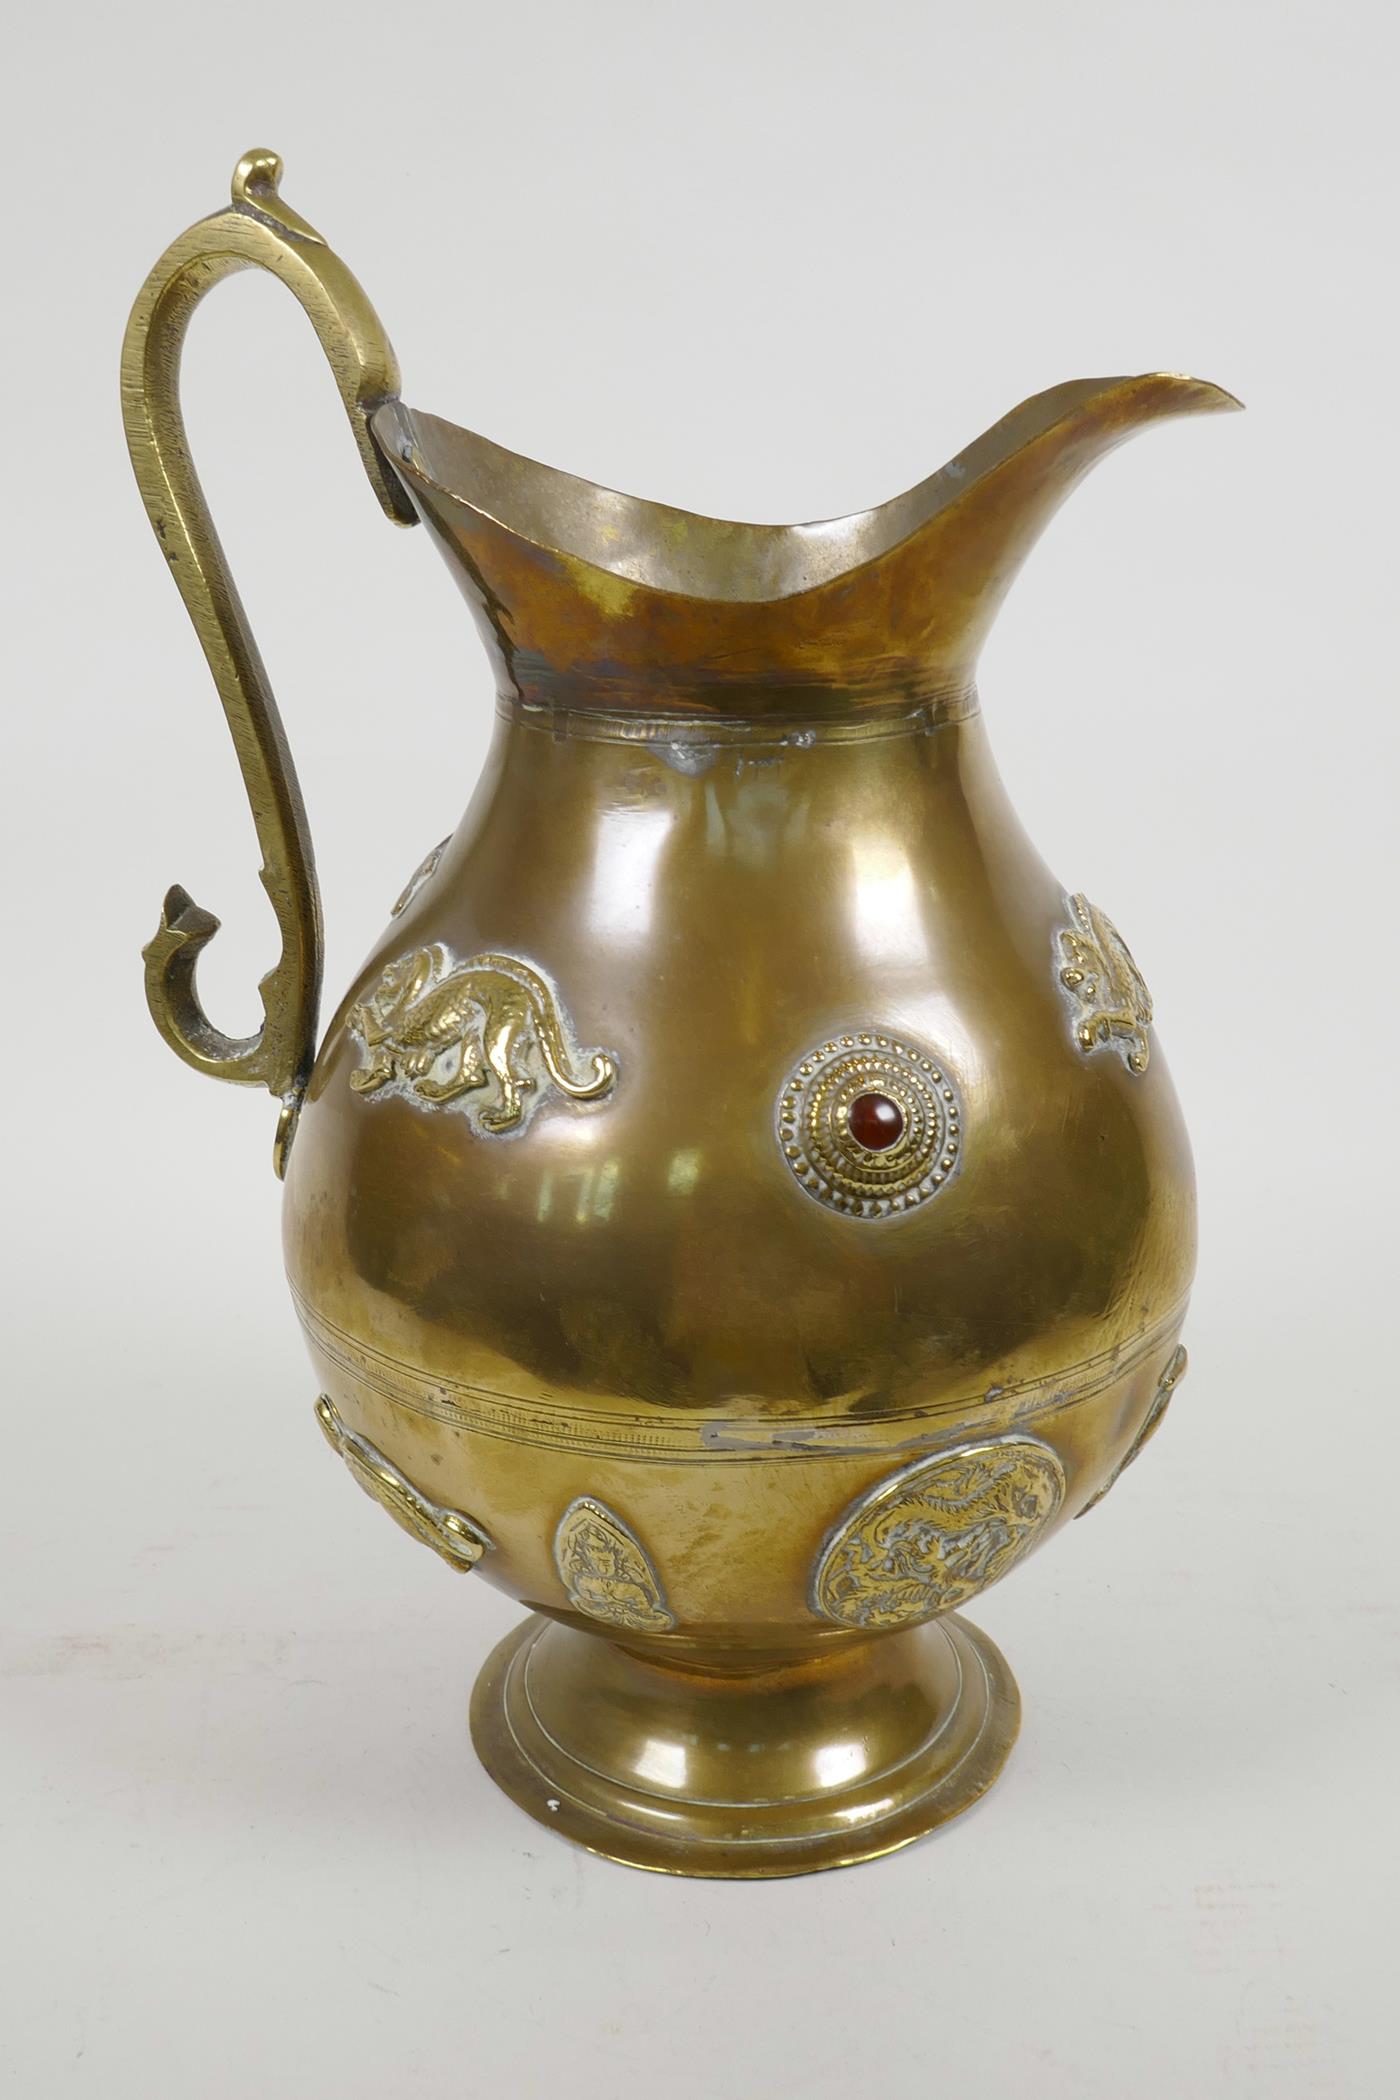 A heavy oriental bronze ewer set with applied cabochon gemstones and plaques of exotic animals and a